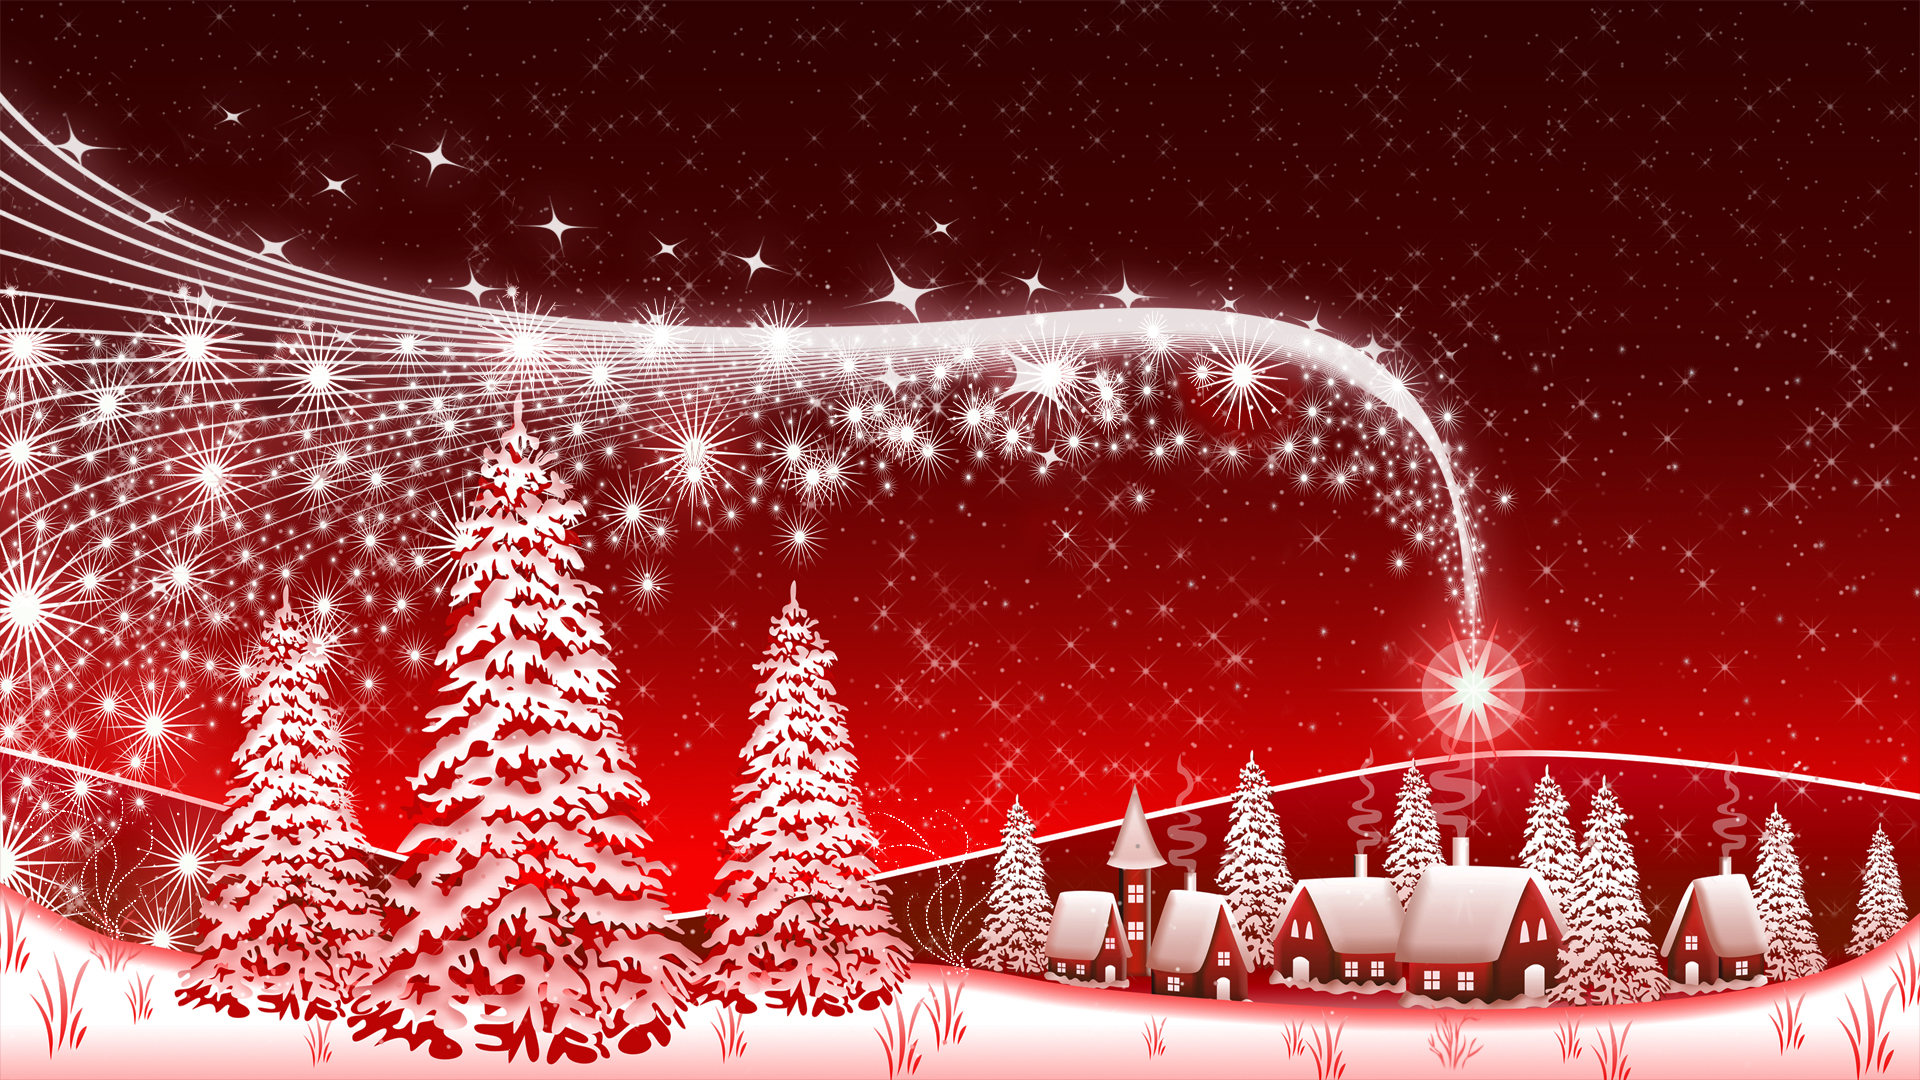 Free Download 10 Beautiful Christmas Wallpapers 1920x1080